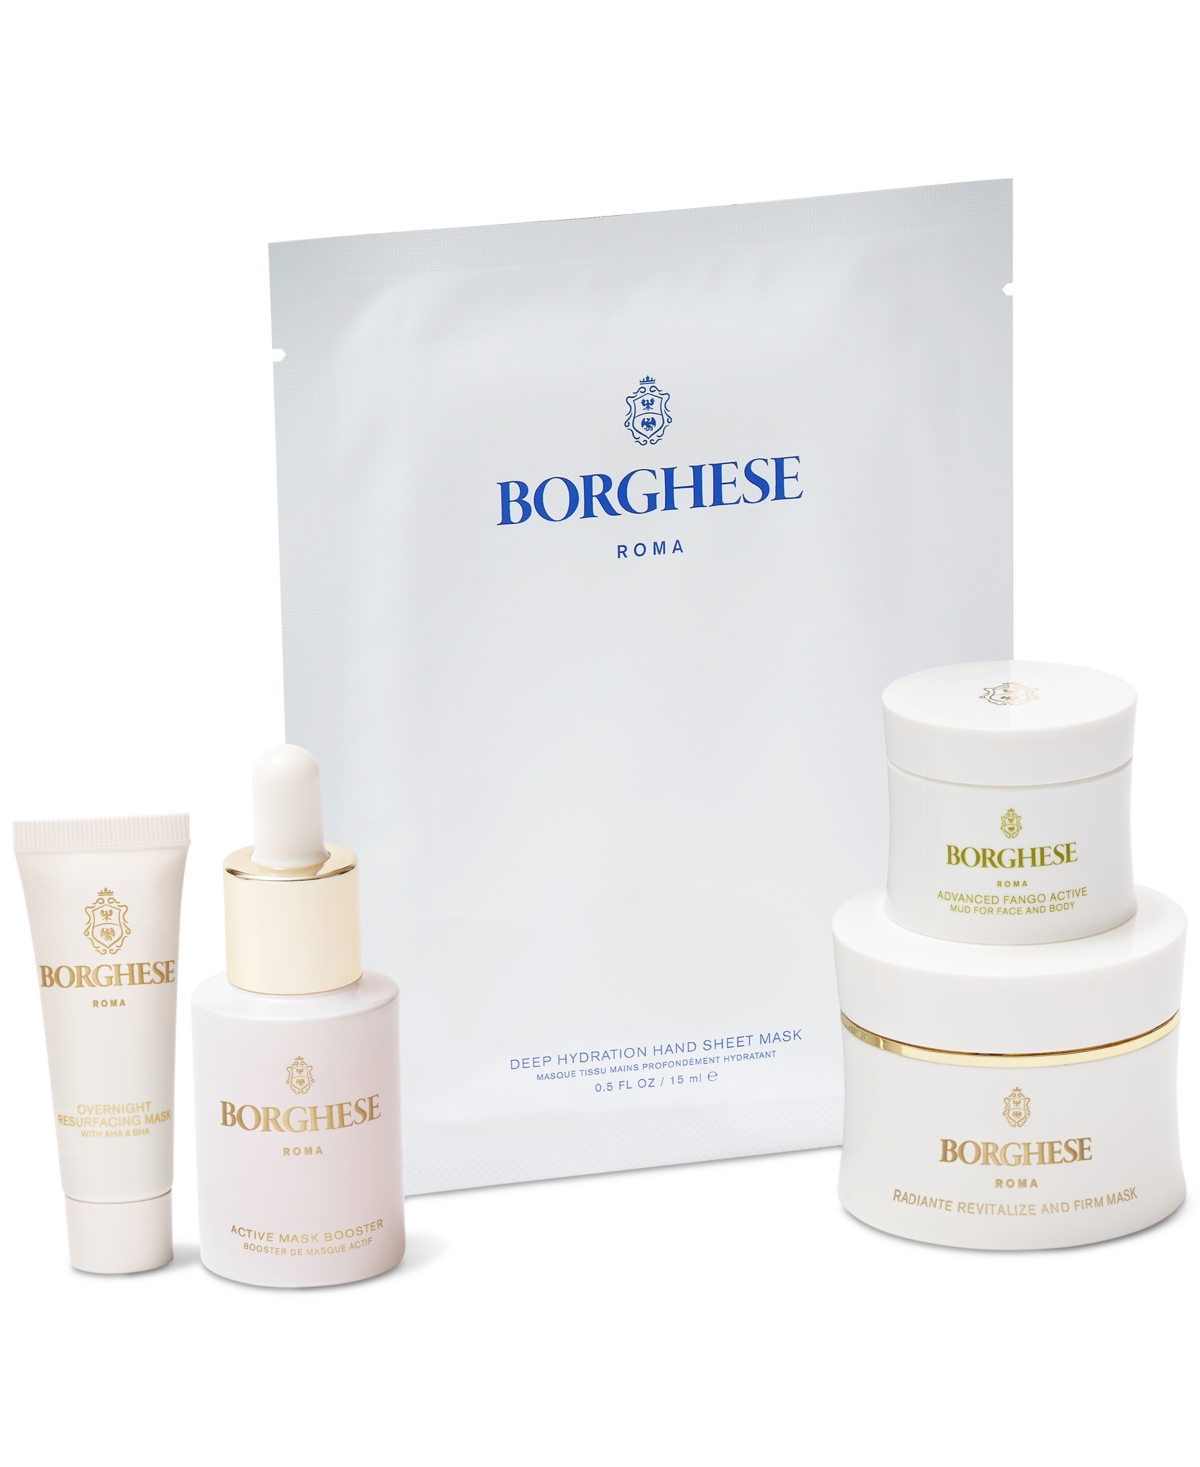 Shop Borghese 5-pc. All You Need To Mask Masking Set In No Color